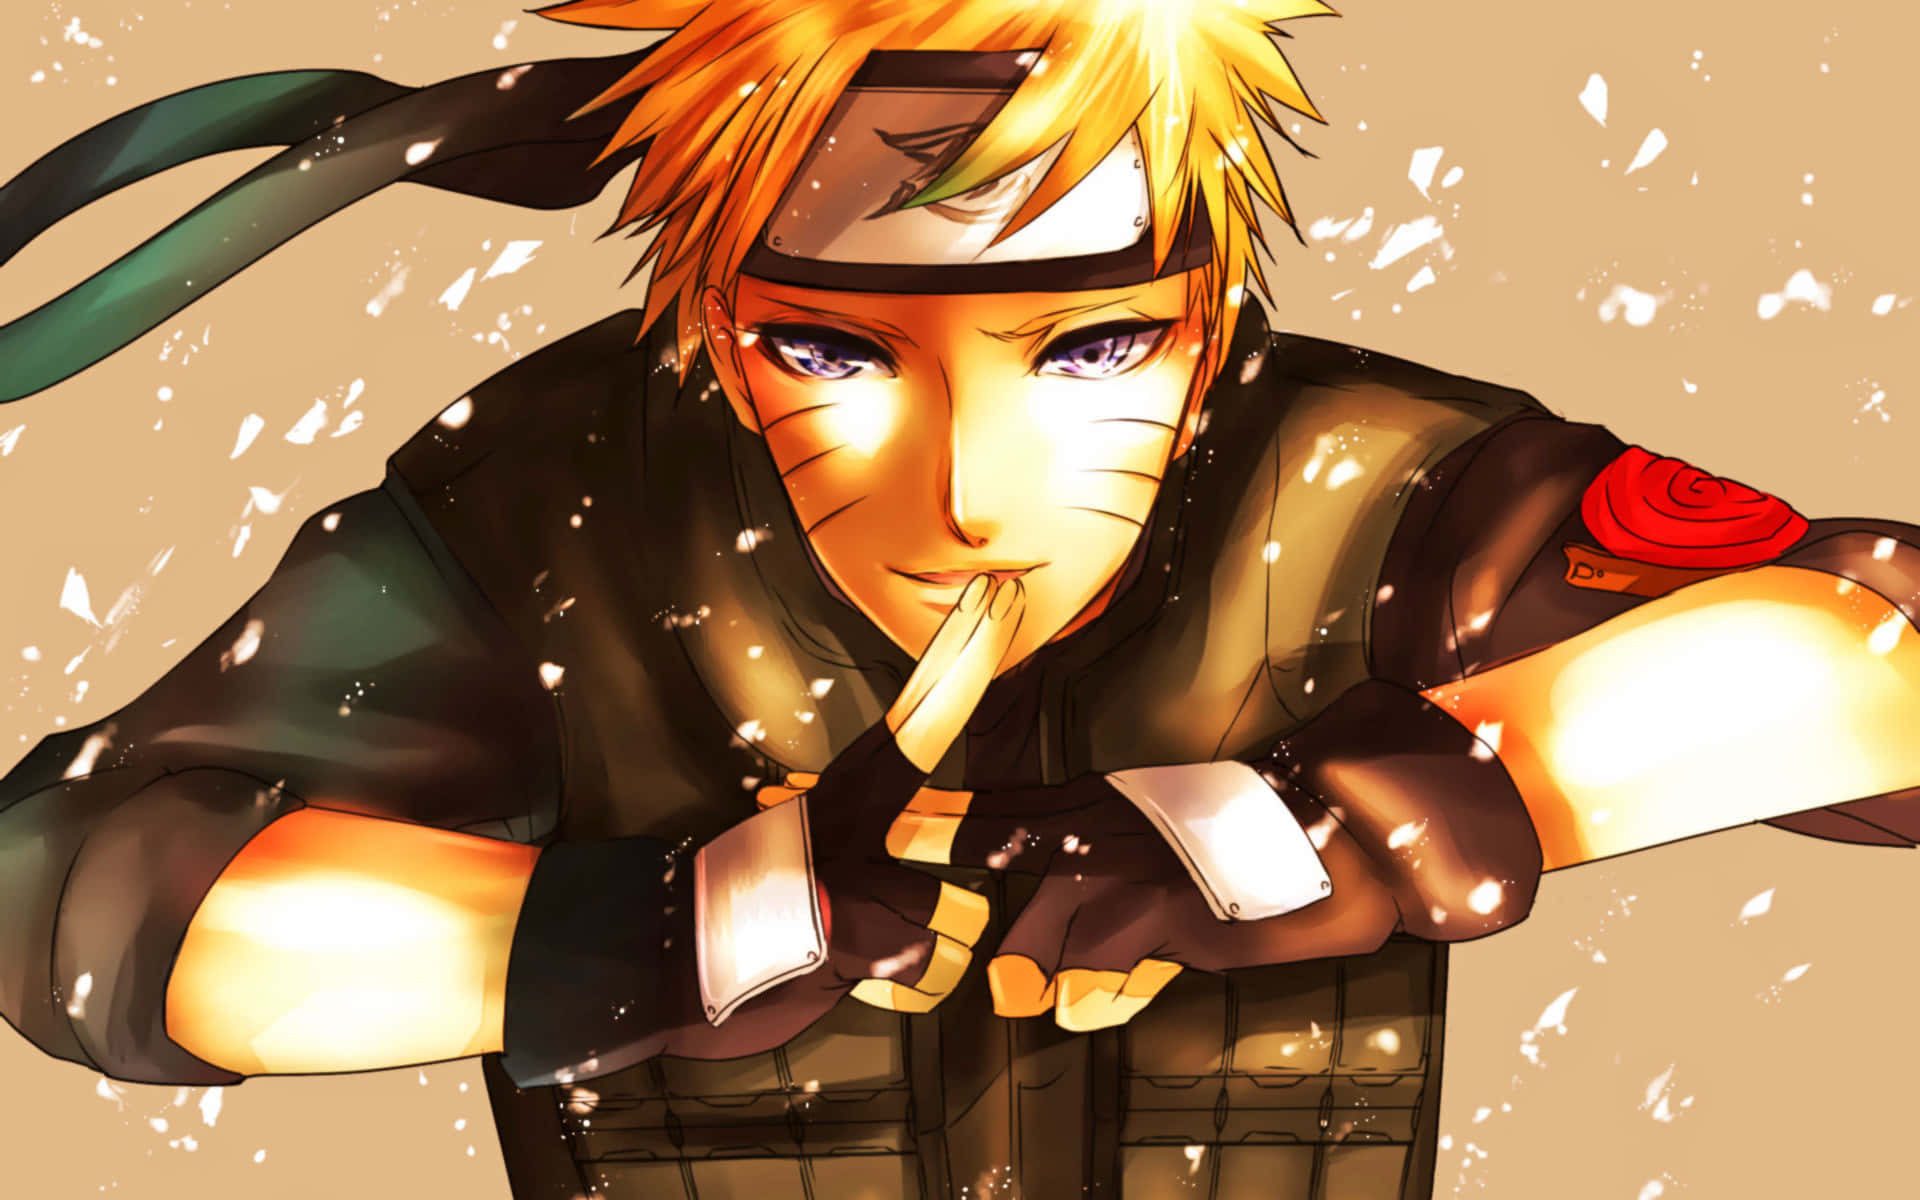 Join Naruto in his epic journey to become a ninja! Wallpaper